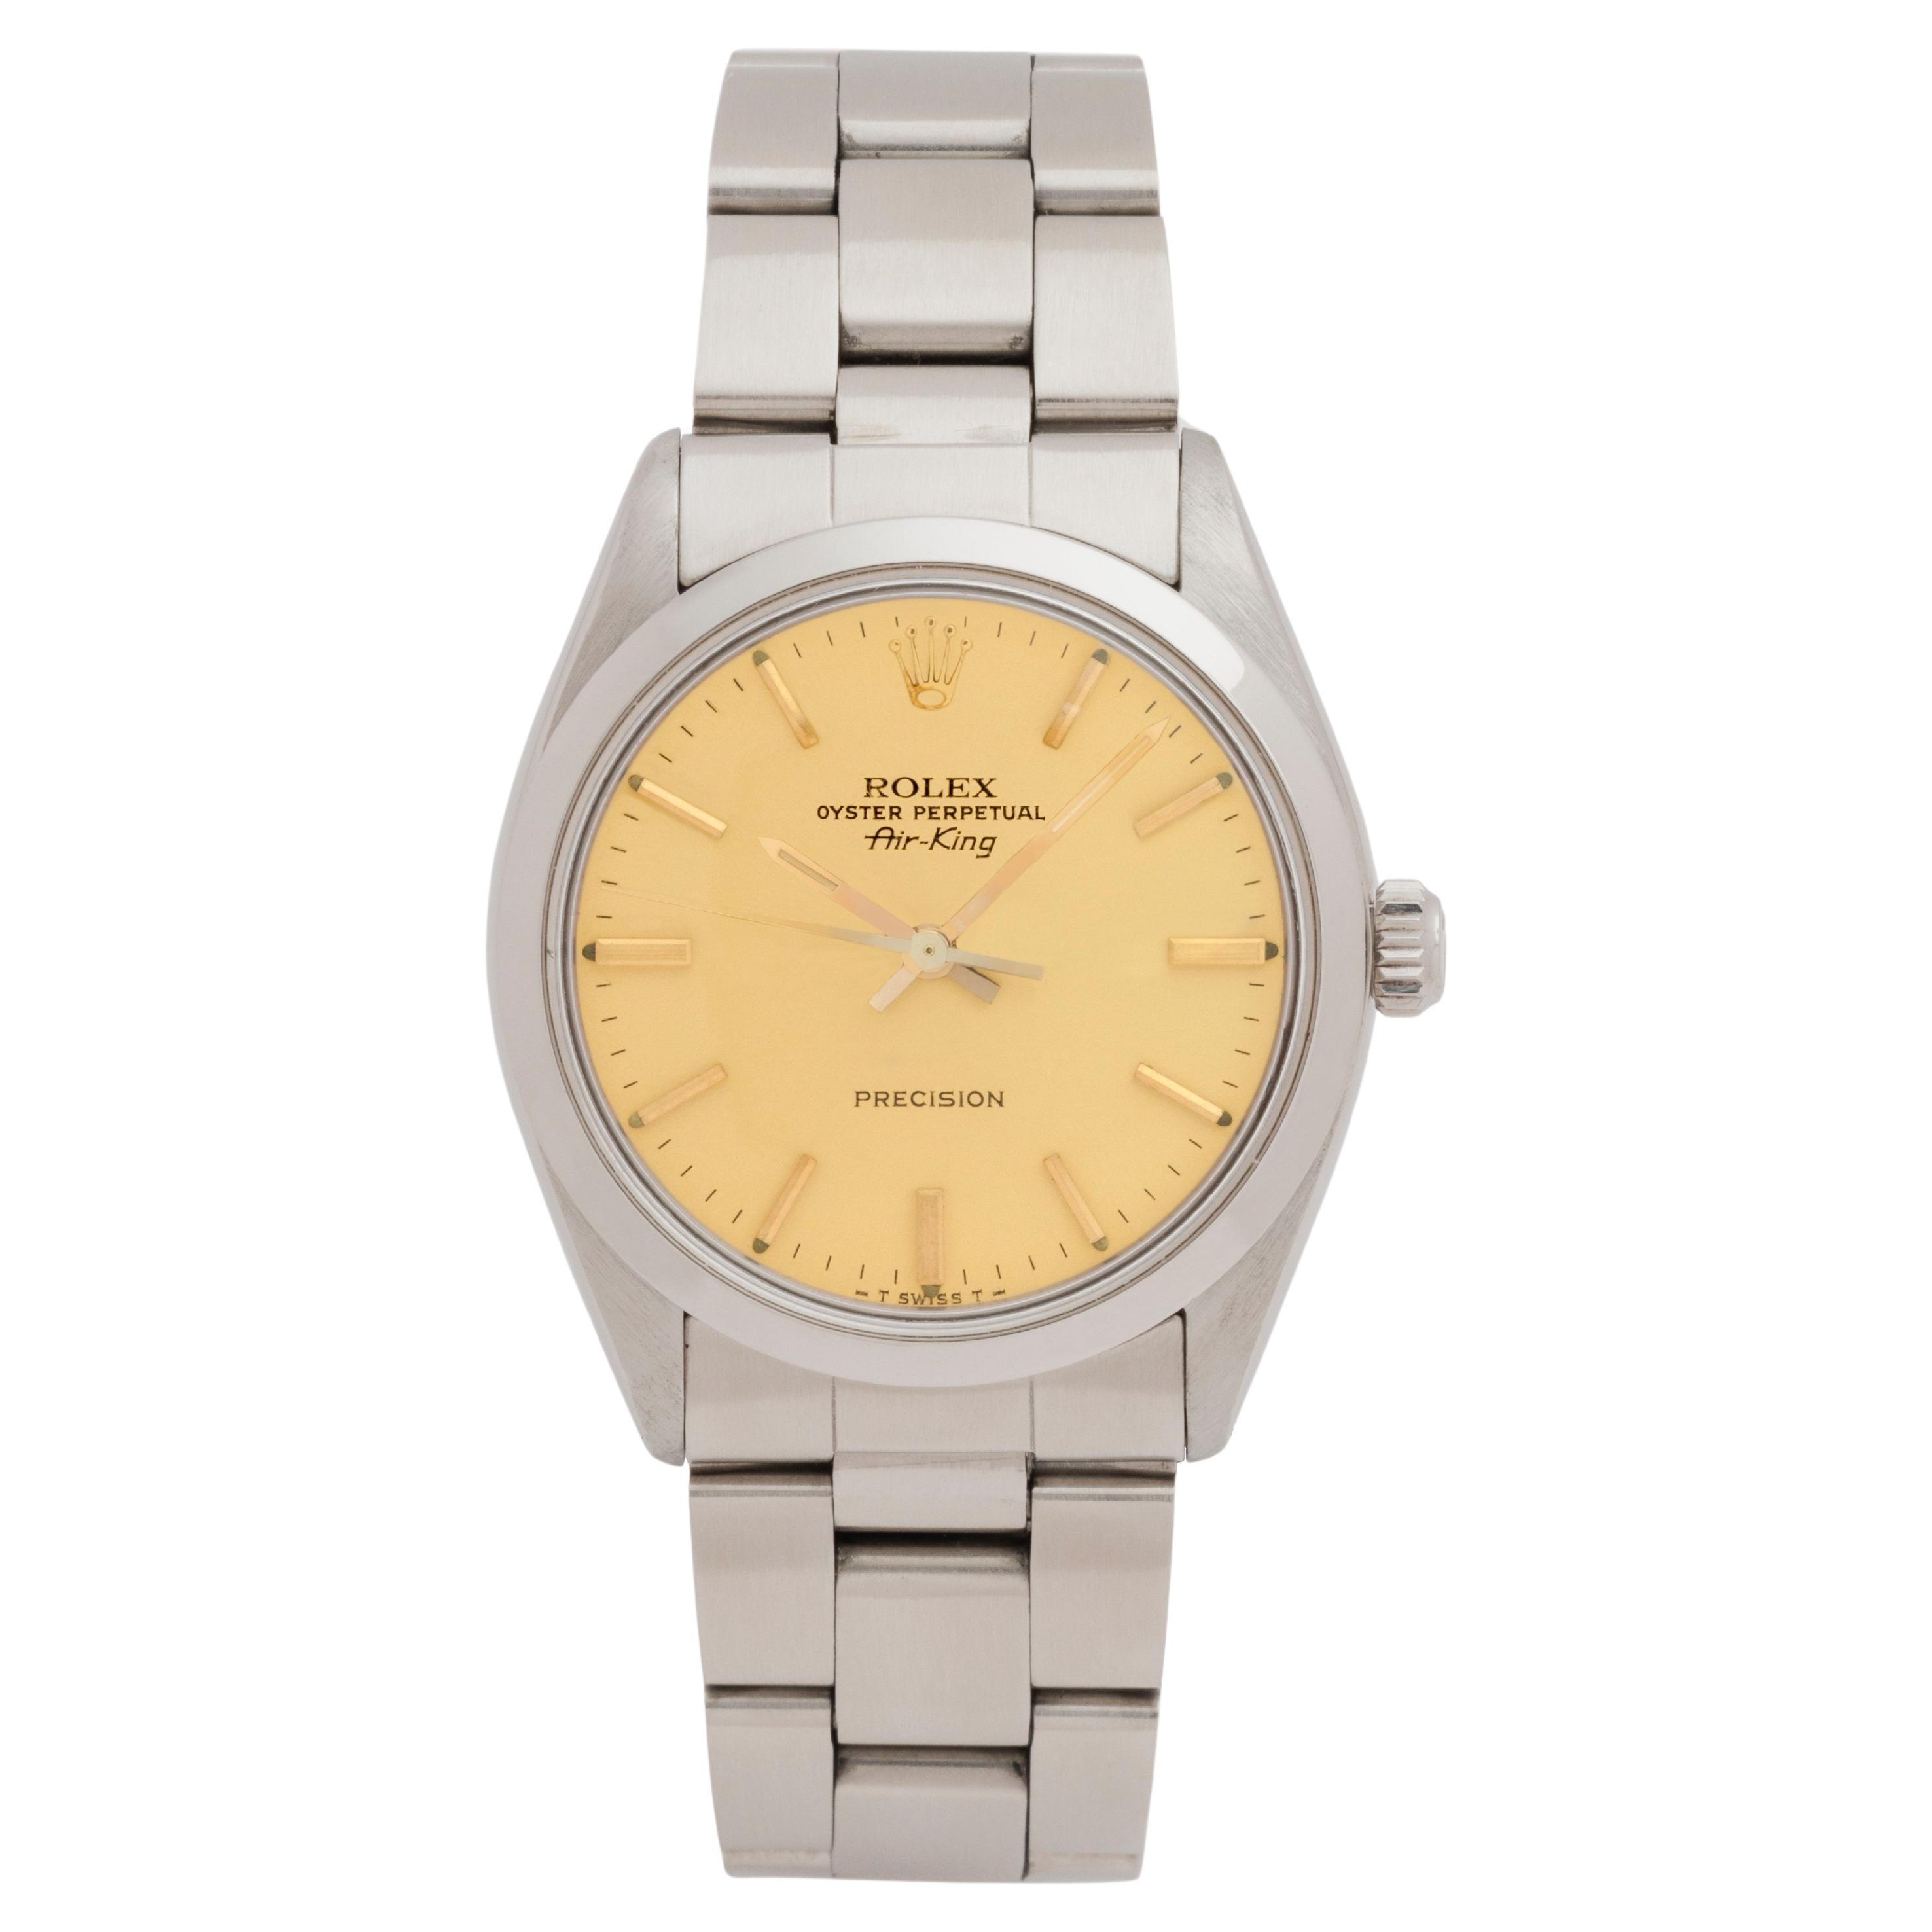 Vintage Rolex Air-King Gold Dial Model 5500 Stainless Steel c.1987 For Sale